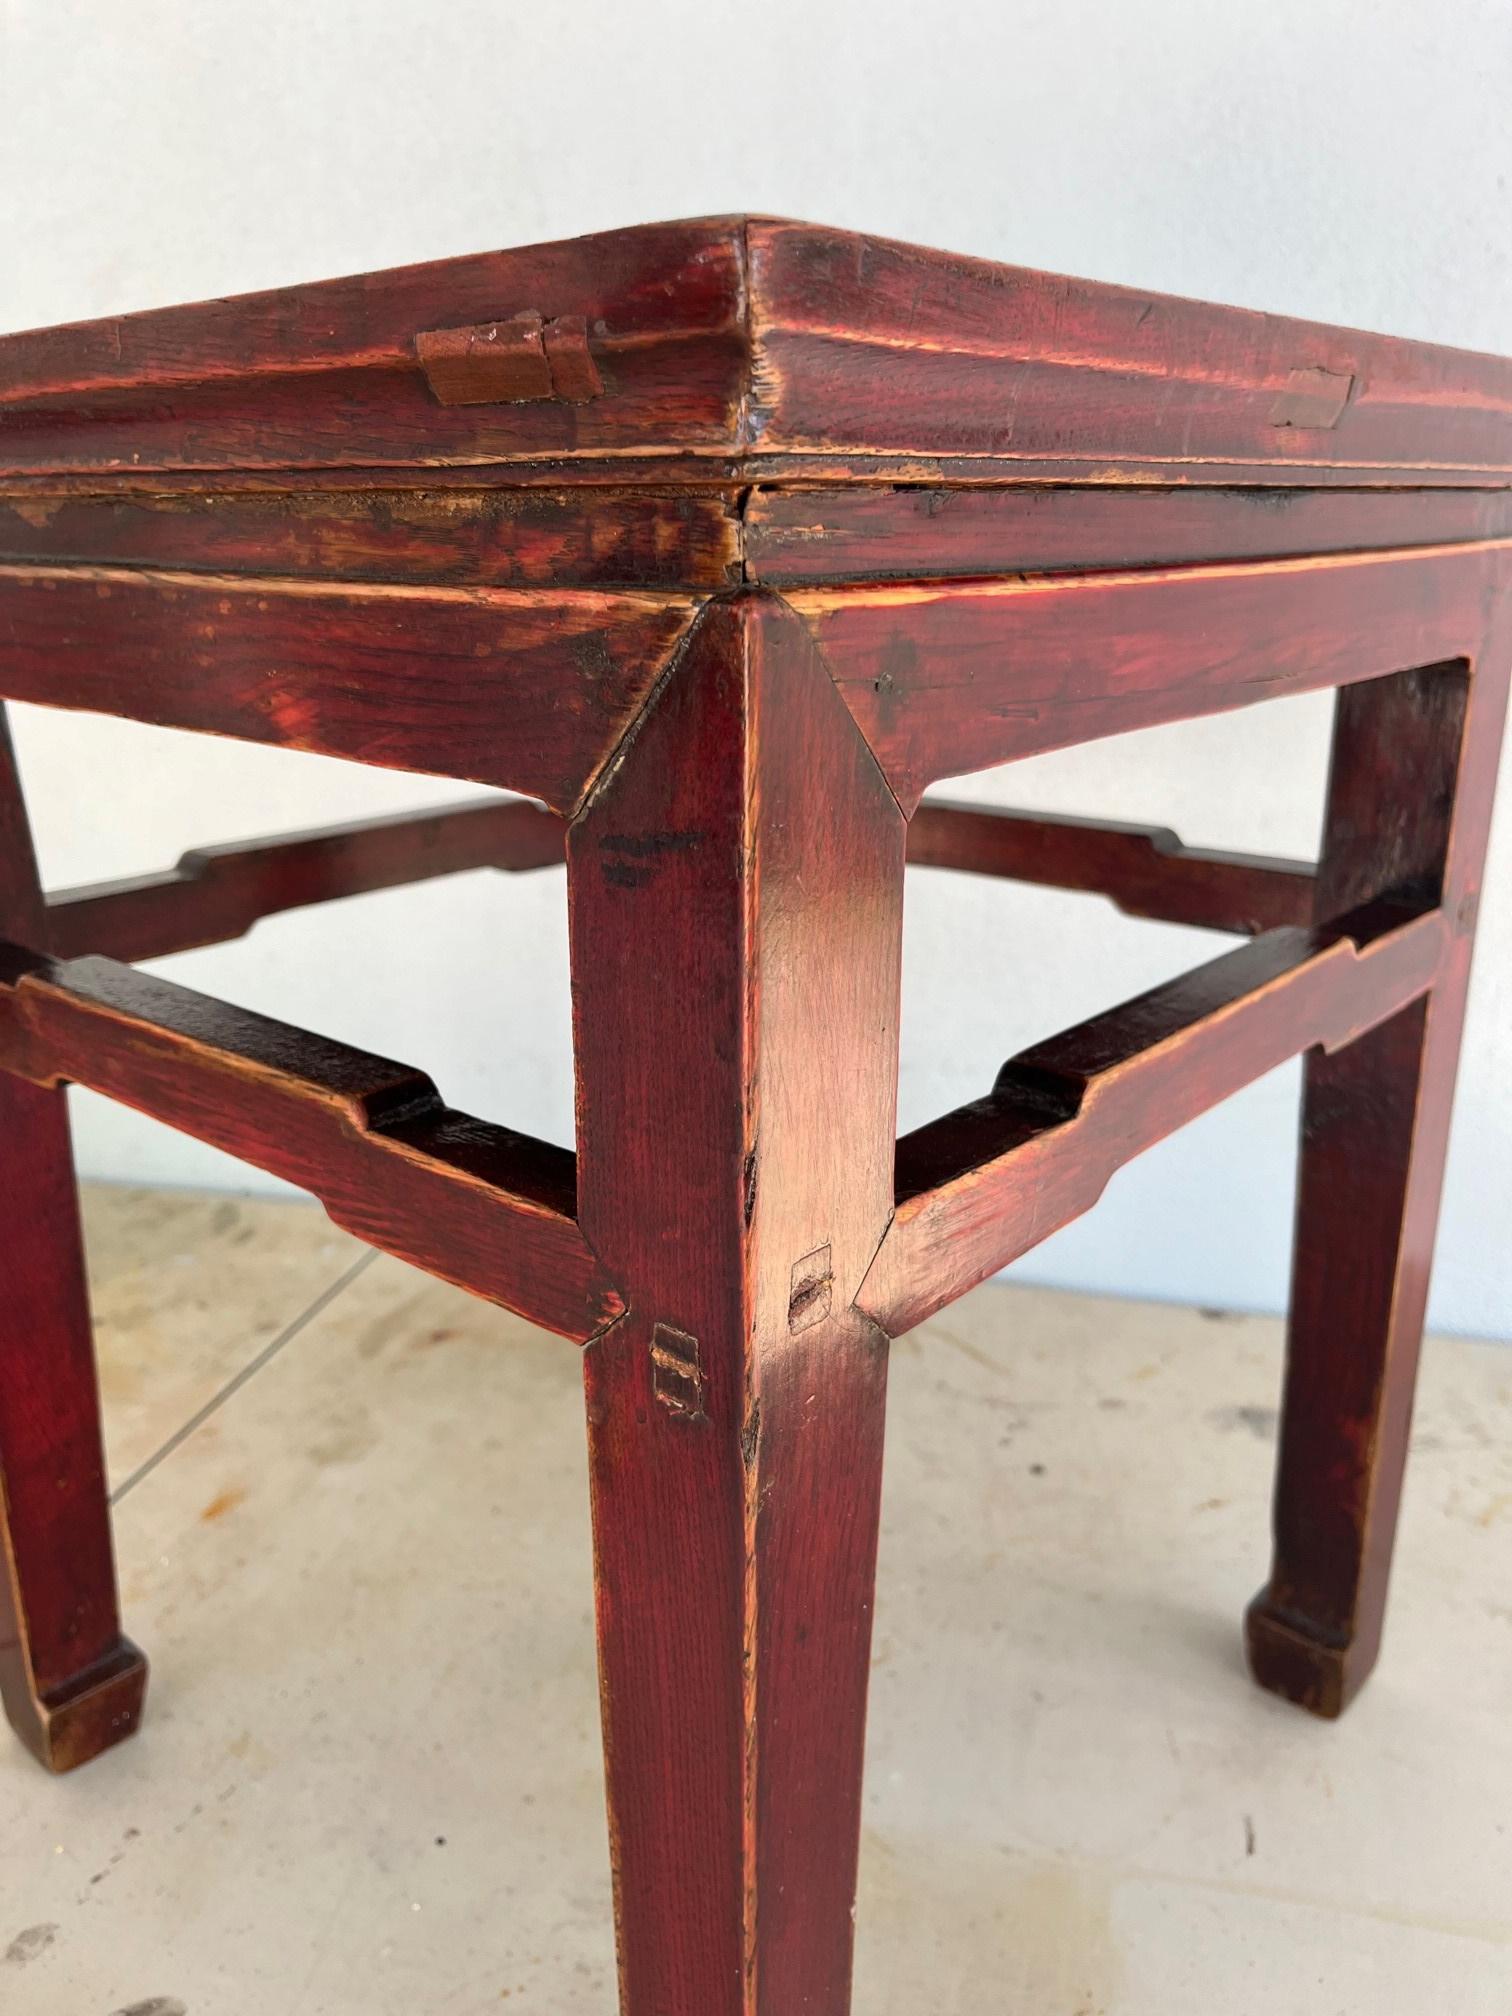 Chinese Ming Dynasty Style side table with humpback stretcher.

Chinese Ming Dynasty style side table from the mid 19th century with
humpback stretchers, horsehoof feet and waisted aprons. It is hand carved
in solid rosewood by fine craftsmen